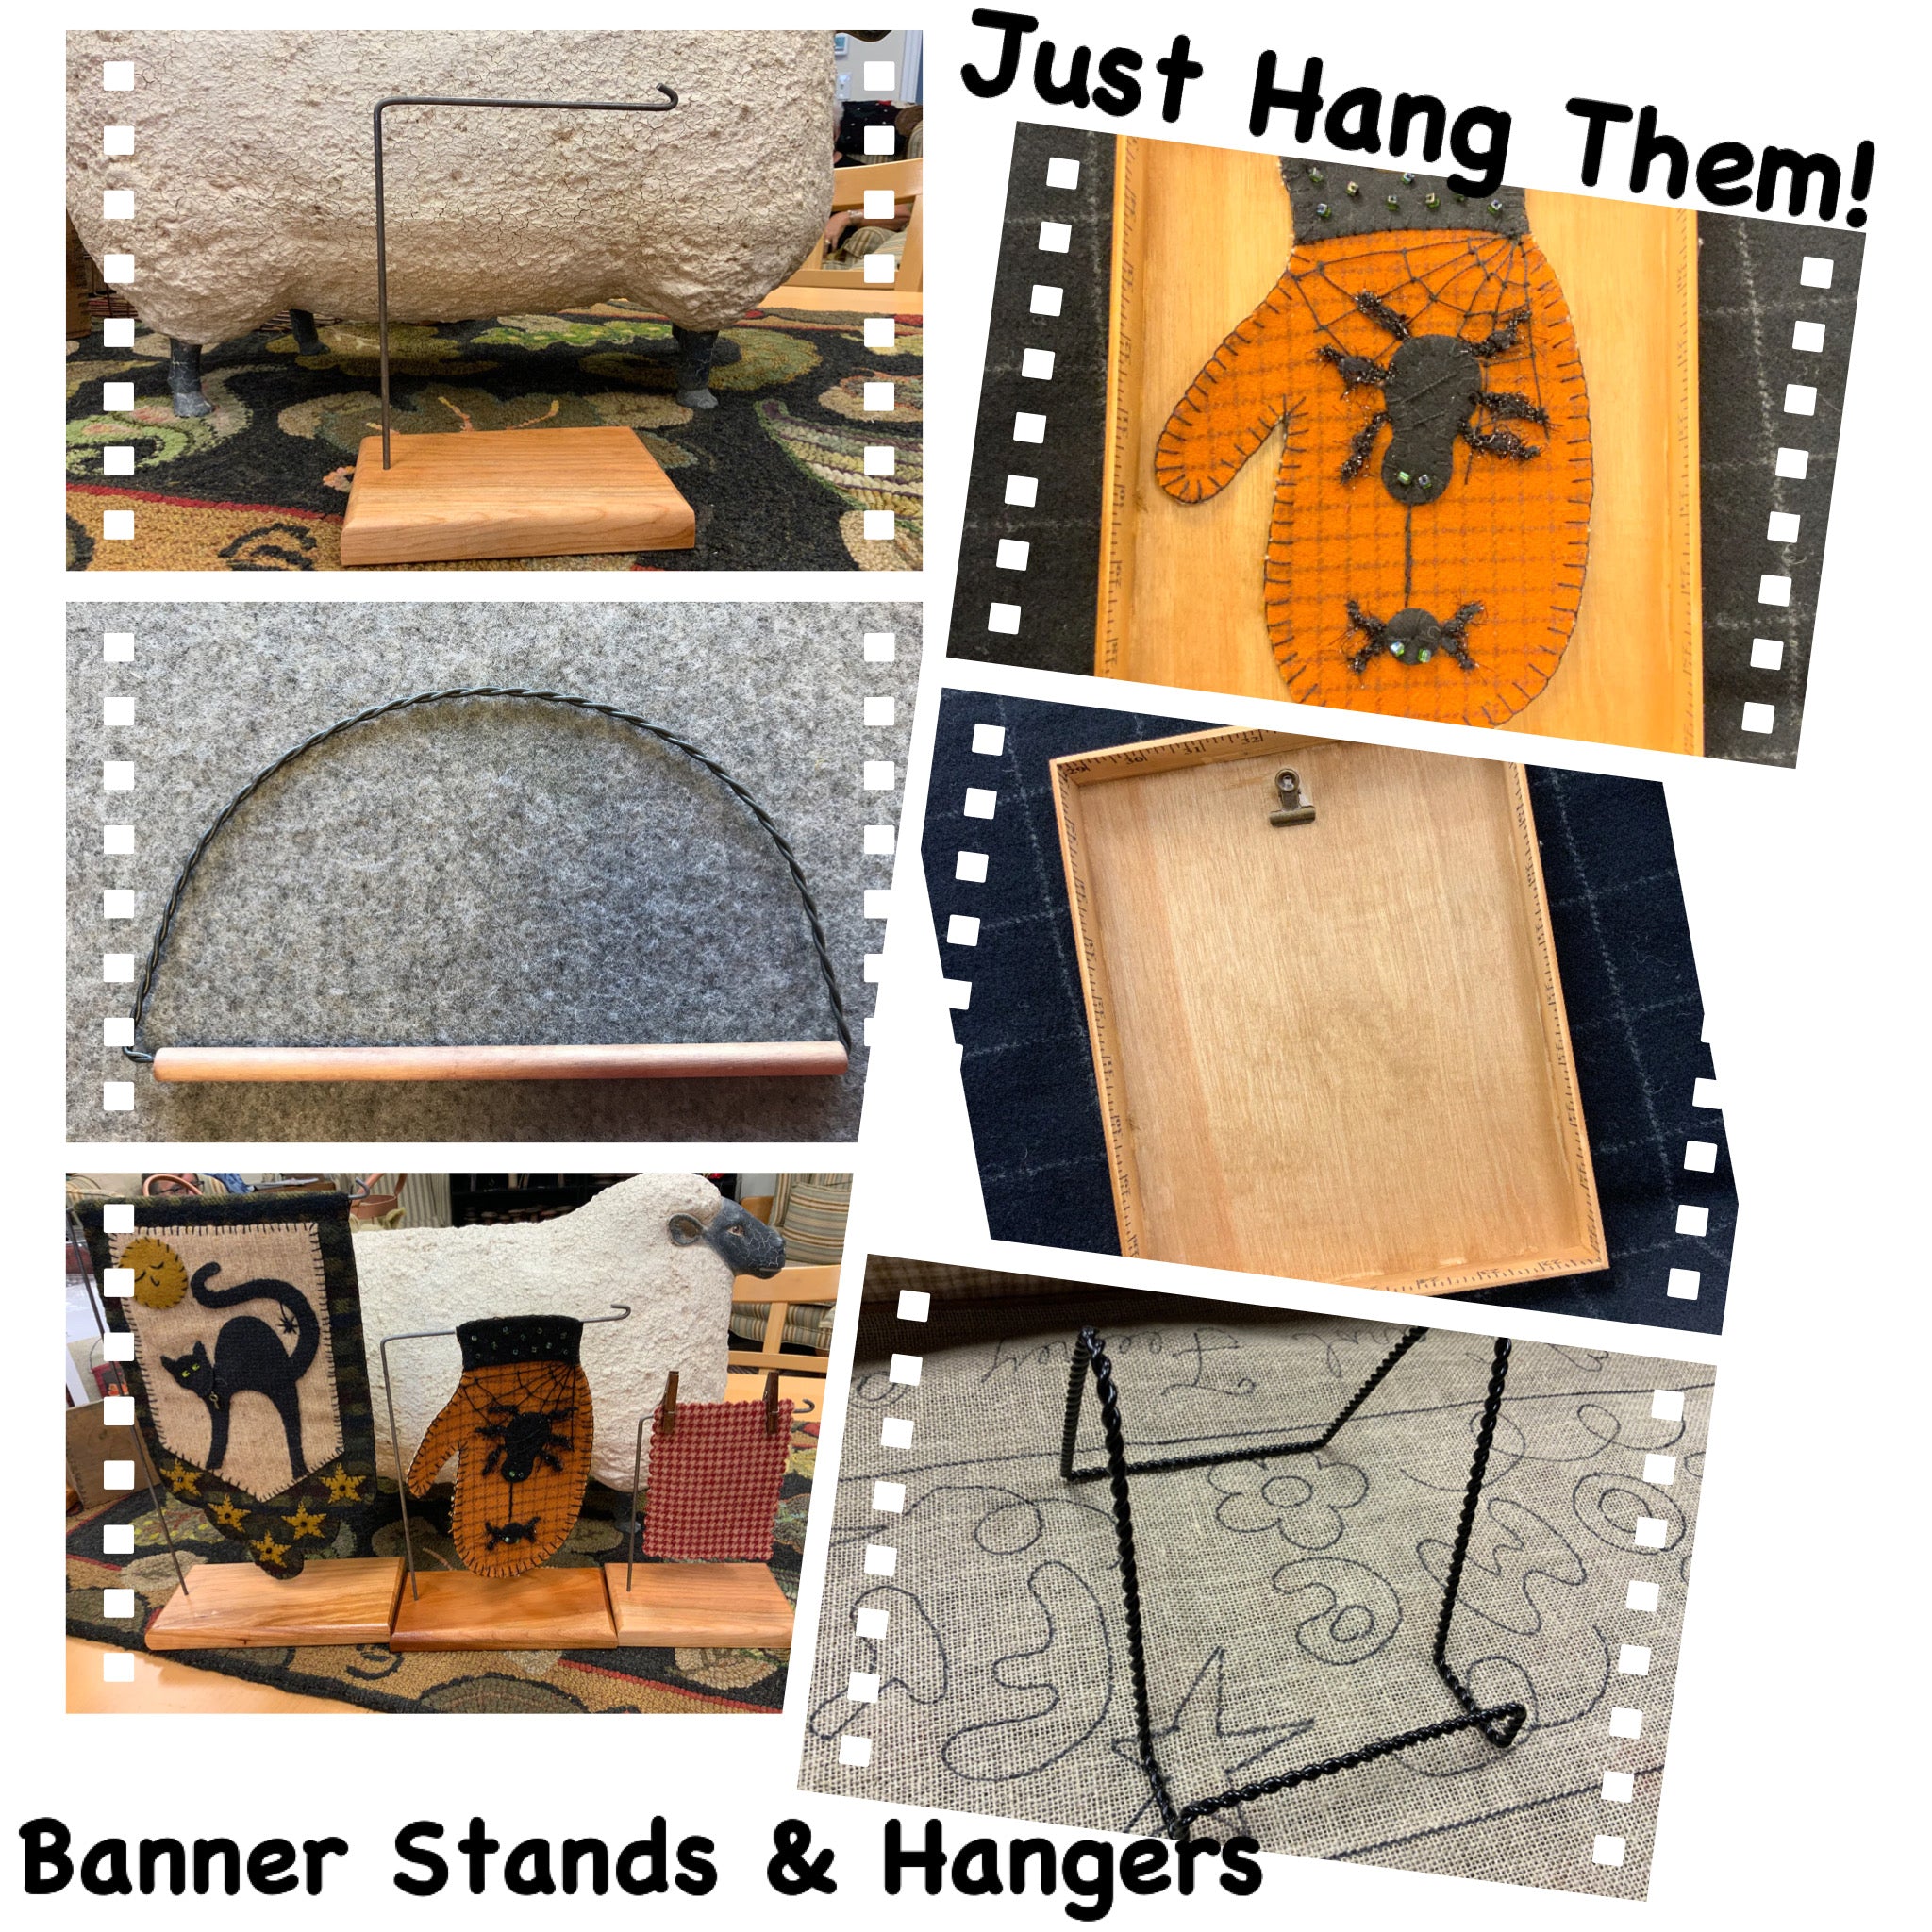 Hangers and Stands